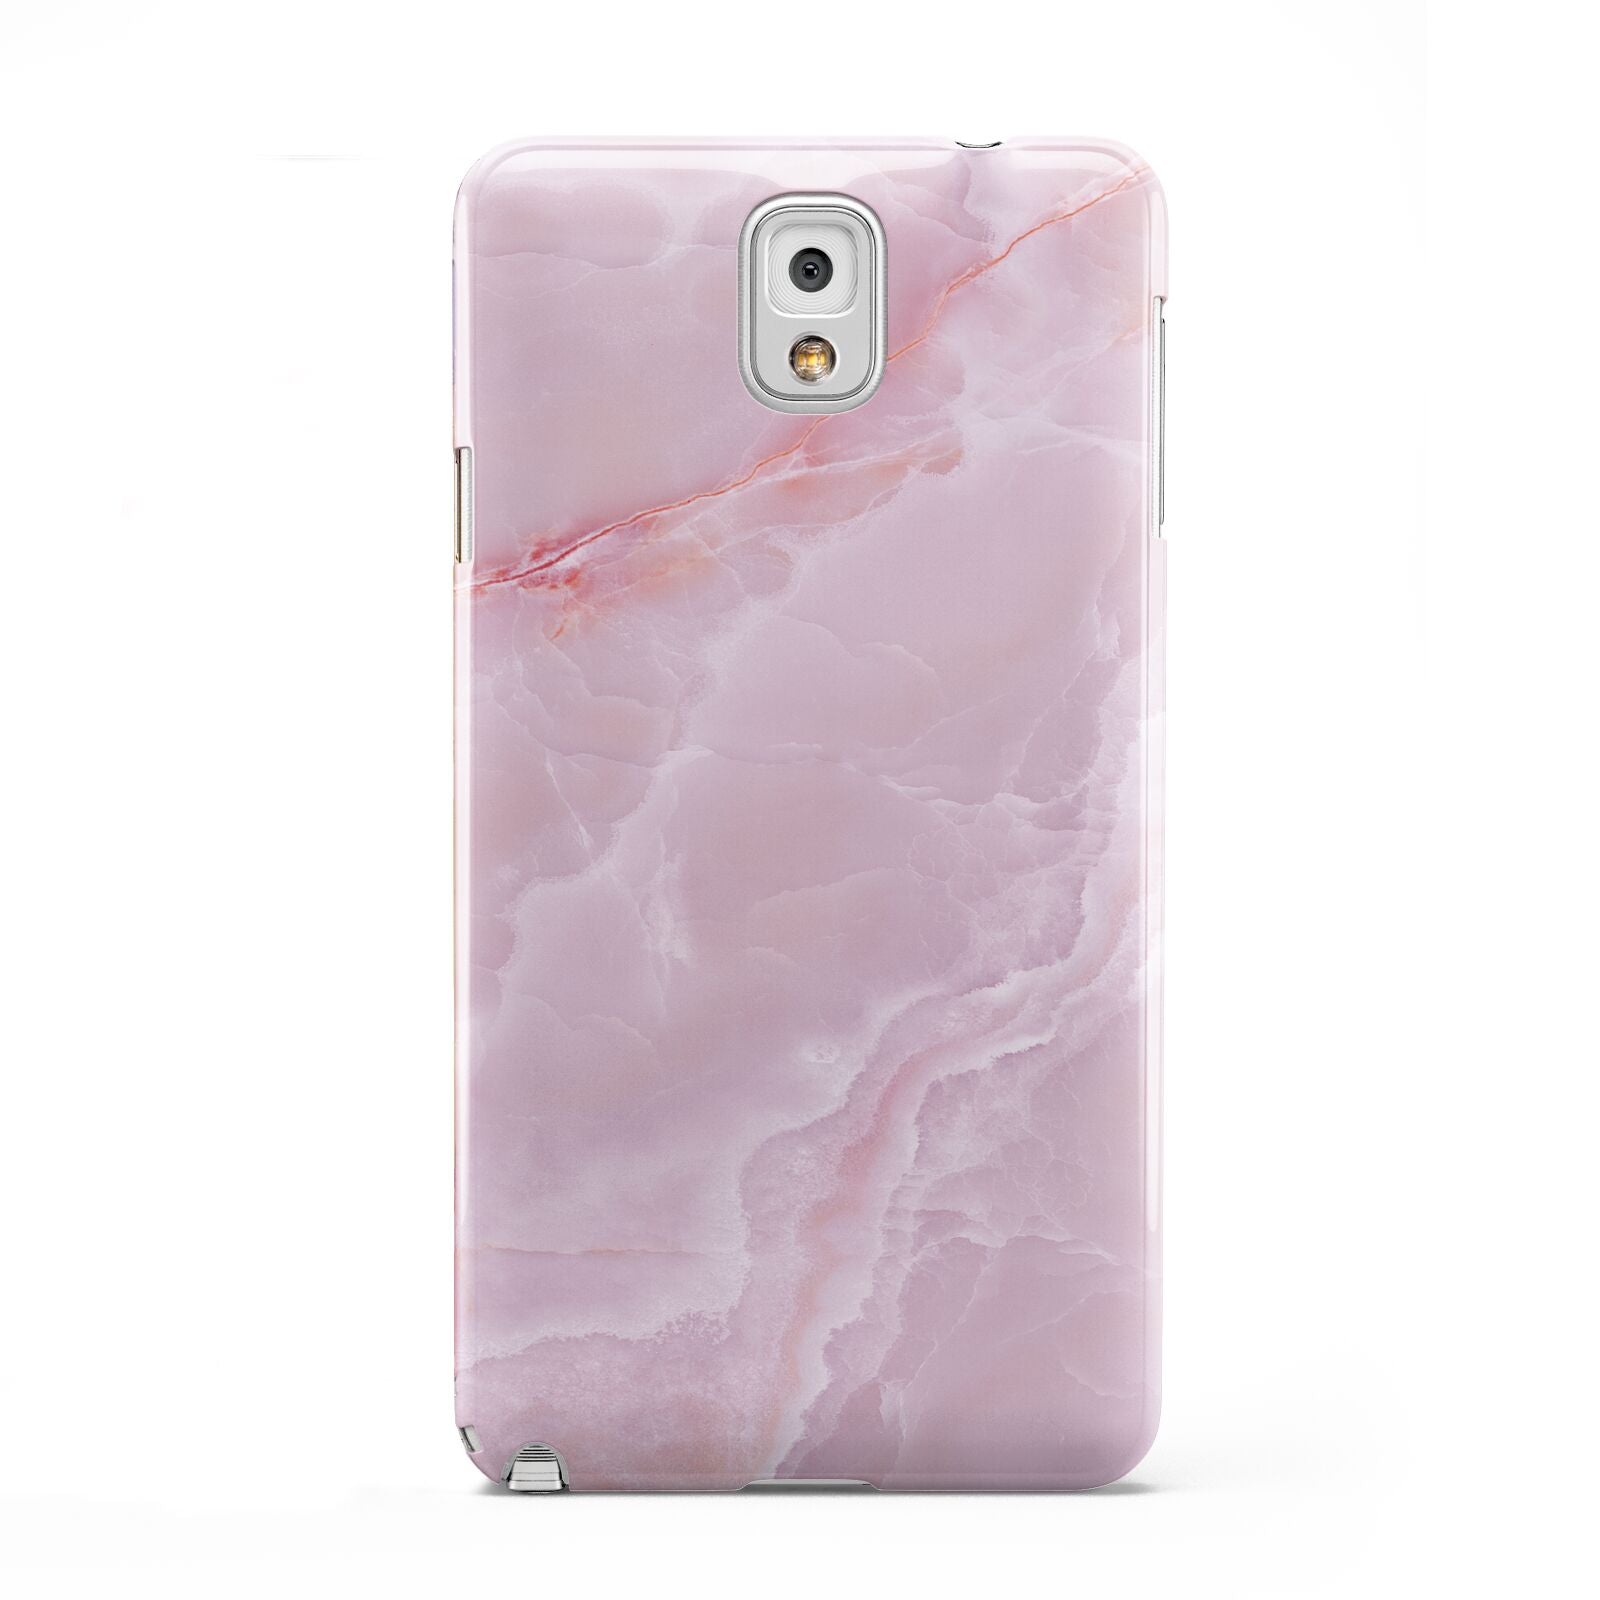 Dreamy Pink Marble Samsung Galaxy Note 3 Case